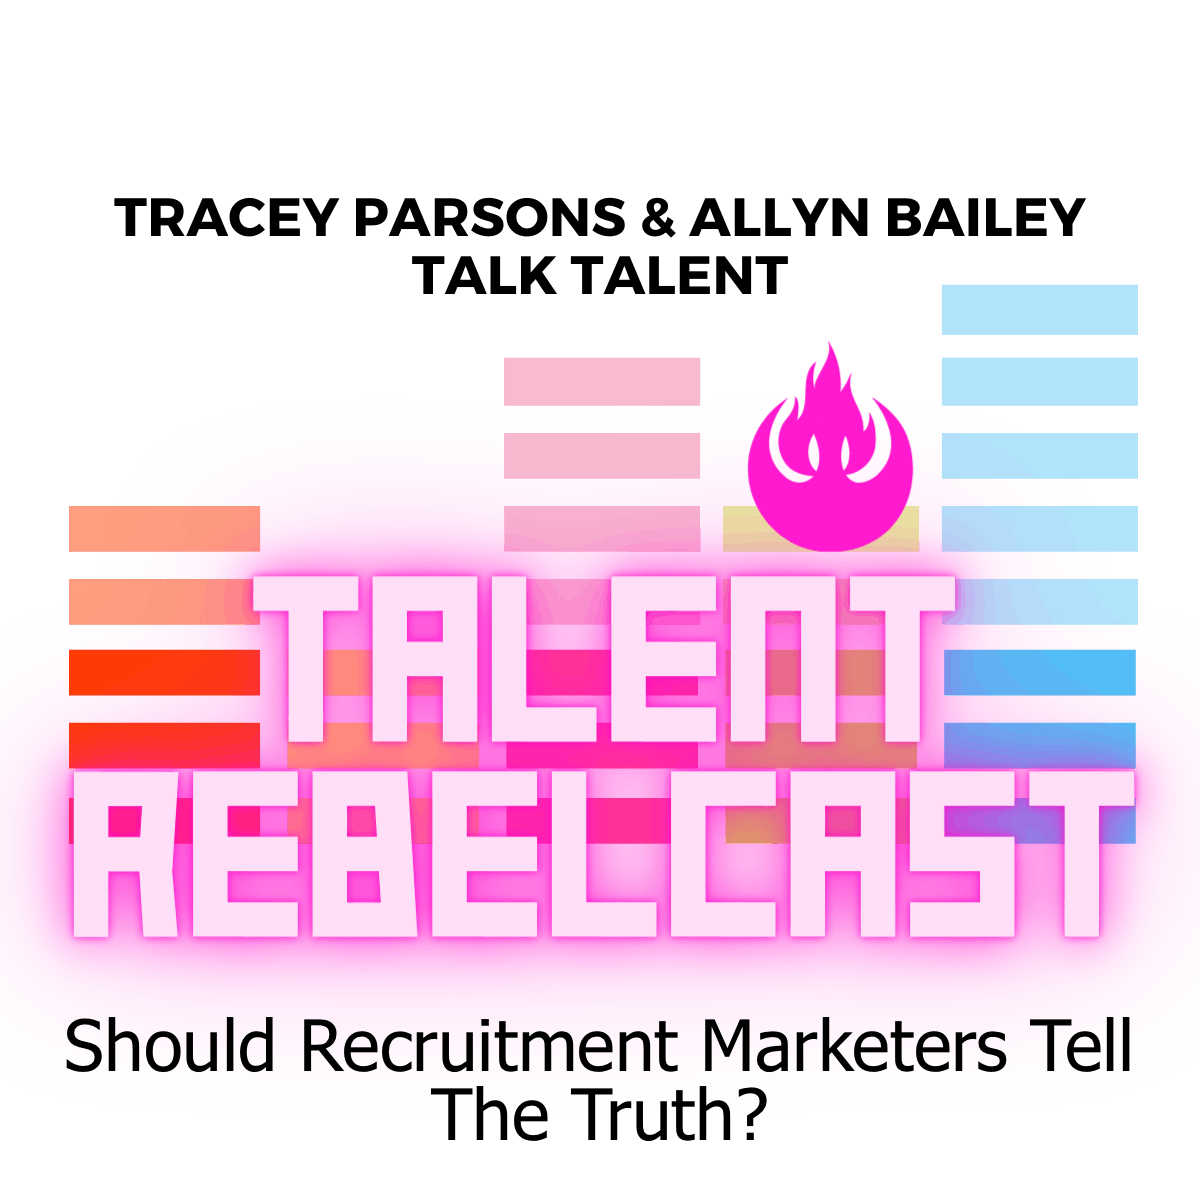 Should Recruitment Marketers Tell The Truth?